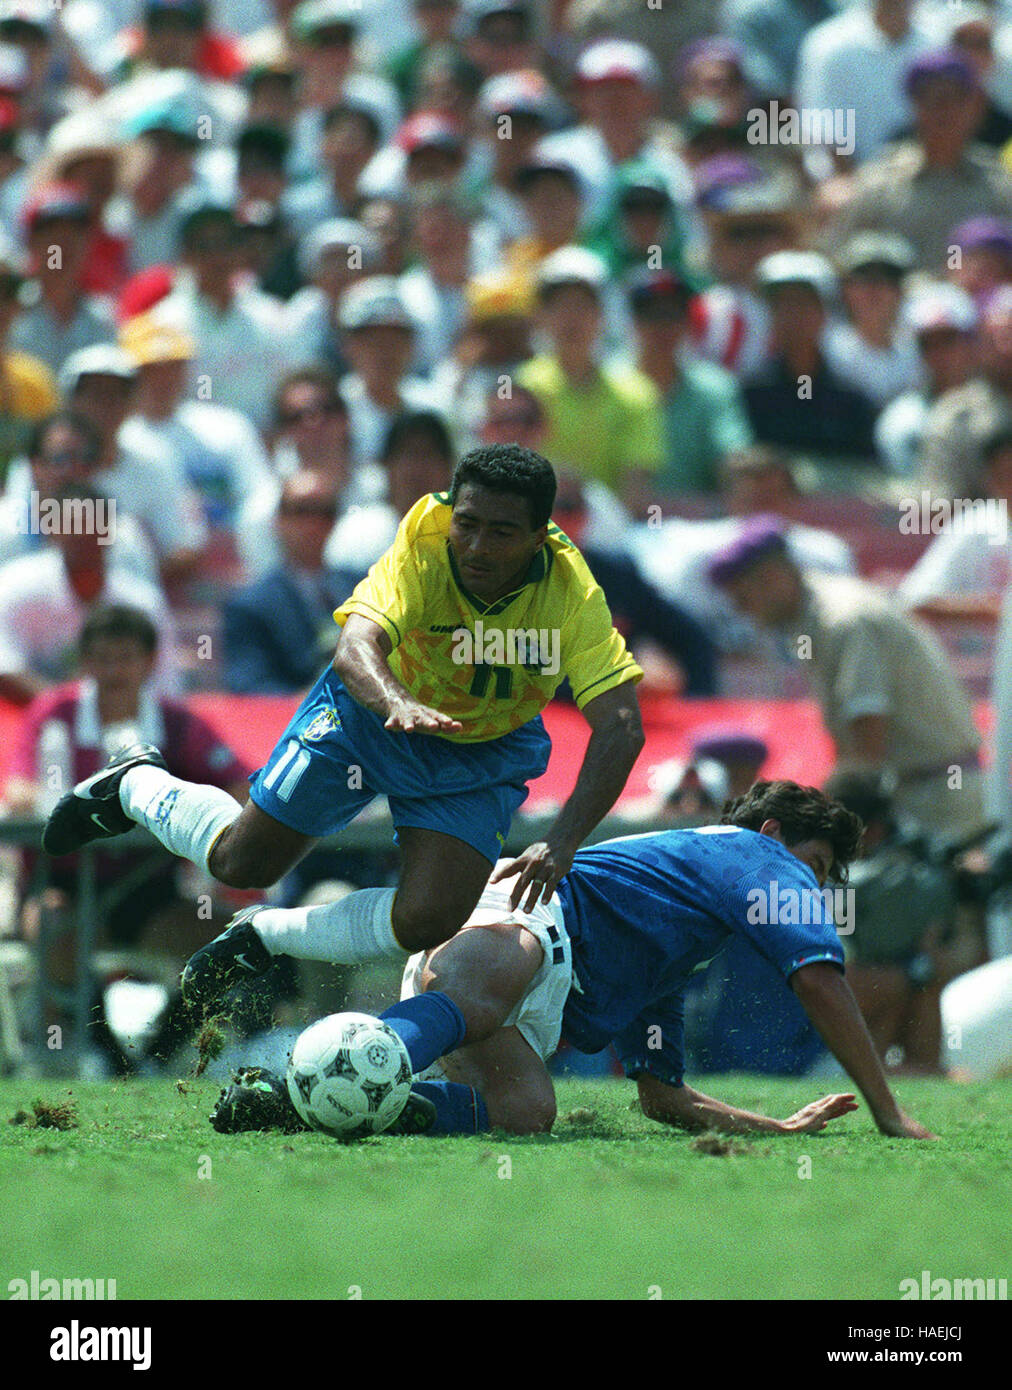 ALBERTINI TAKES OUT ROMARIO ITALY V BRAZIL WORLD CUP FINAL 17 July 1994 Stock Photo